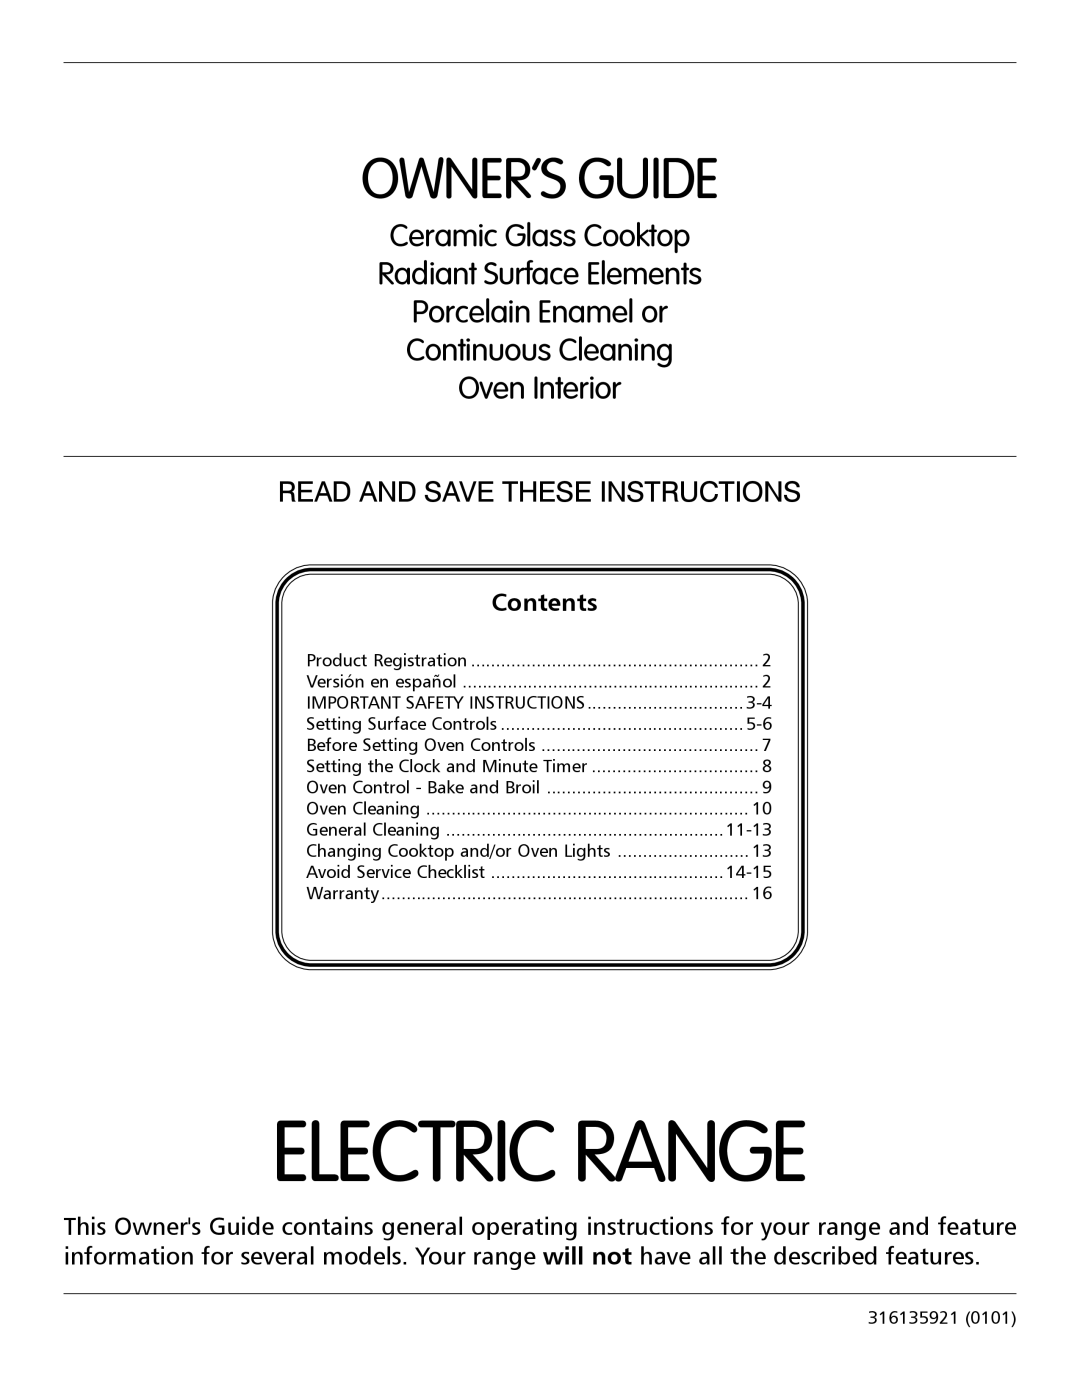 Frigidaire 316135921 important safety instructions Electric Range, Owner’S Guide, Continuous Cleaning Oven Interior 